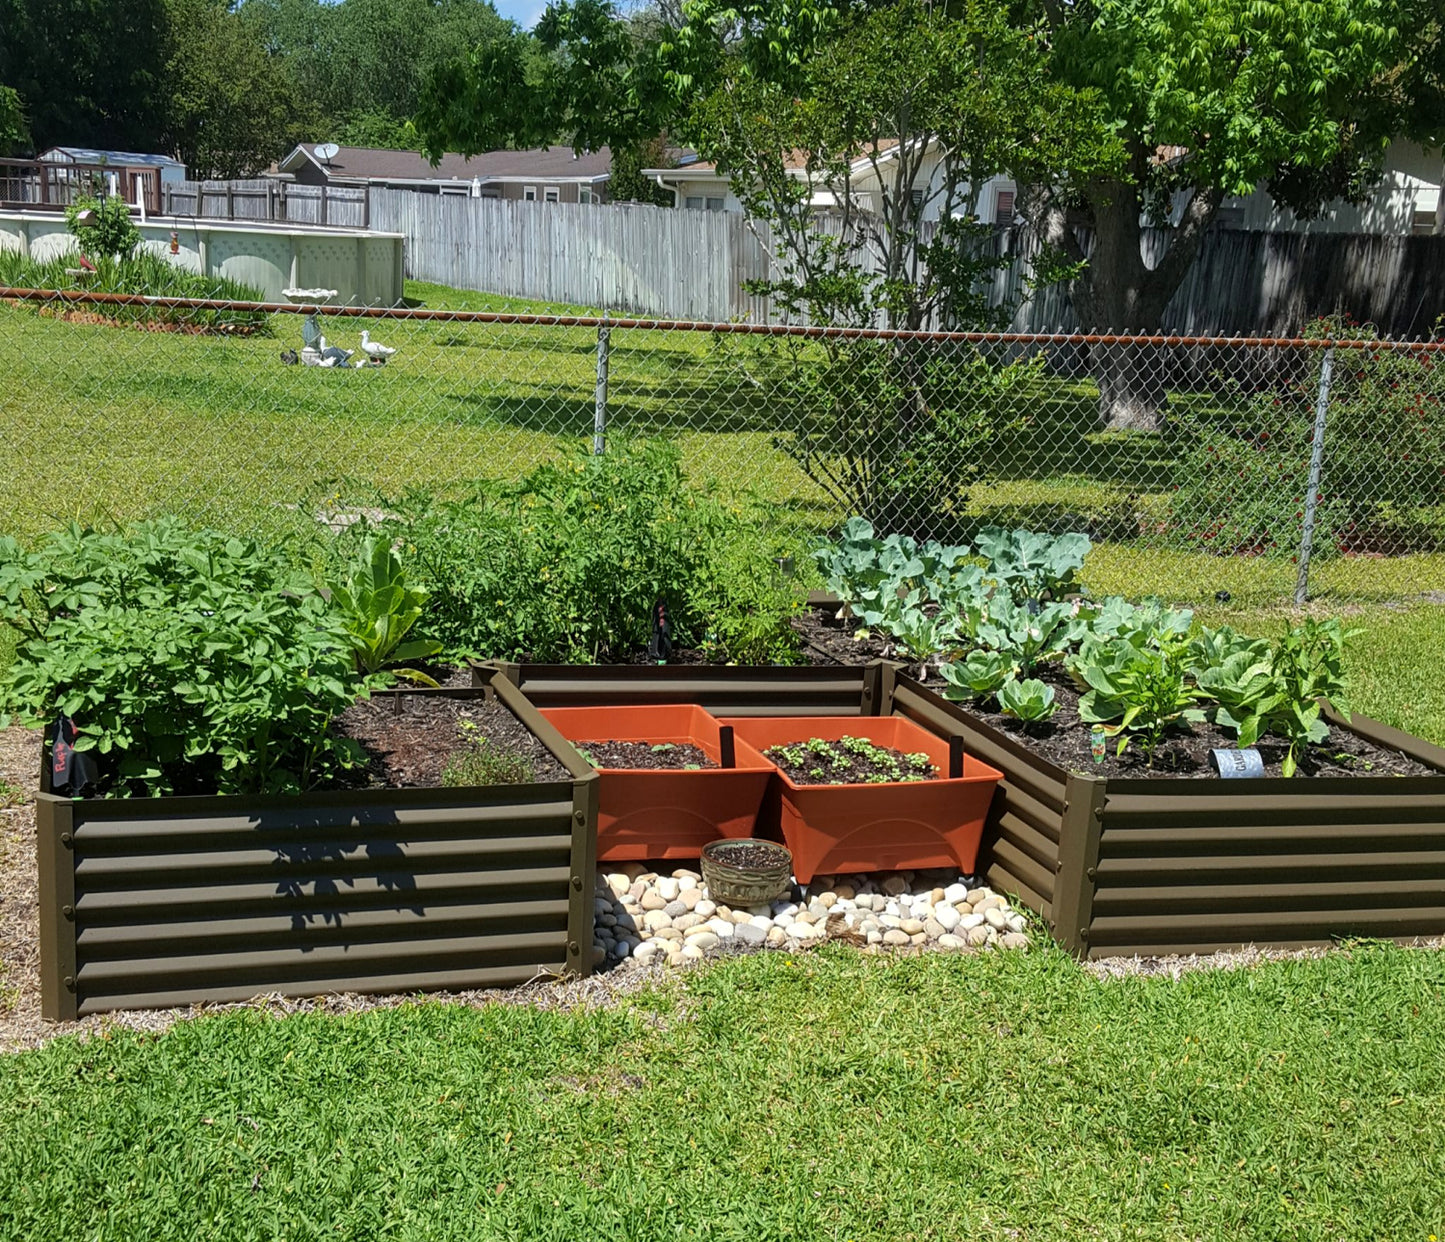 rustic u shaped garden bed with potatoes, cabbage